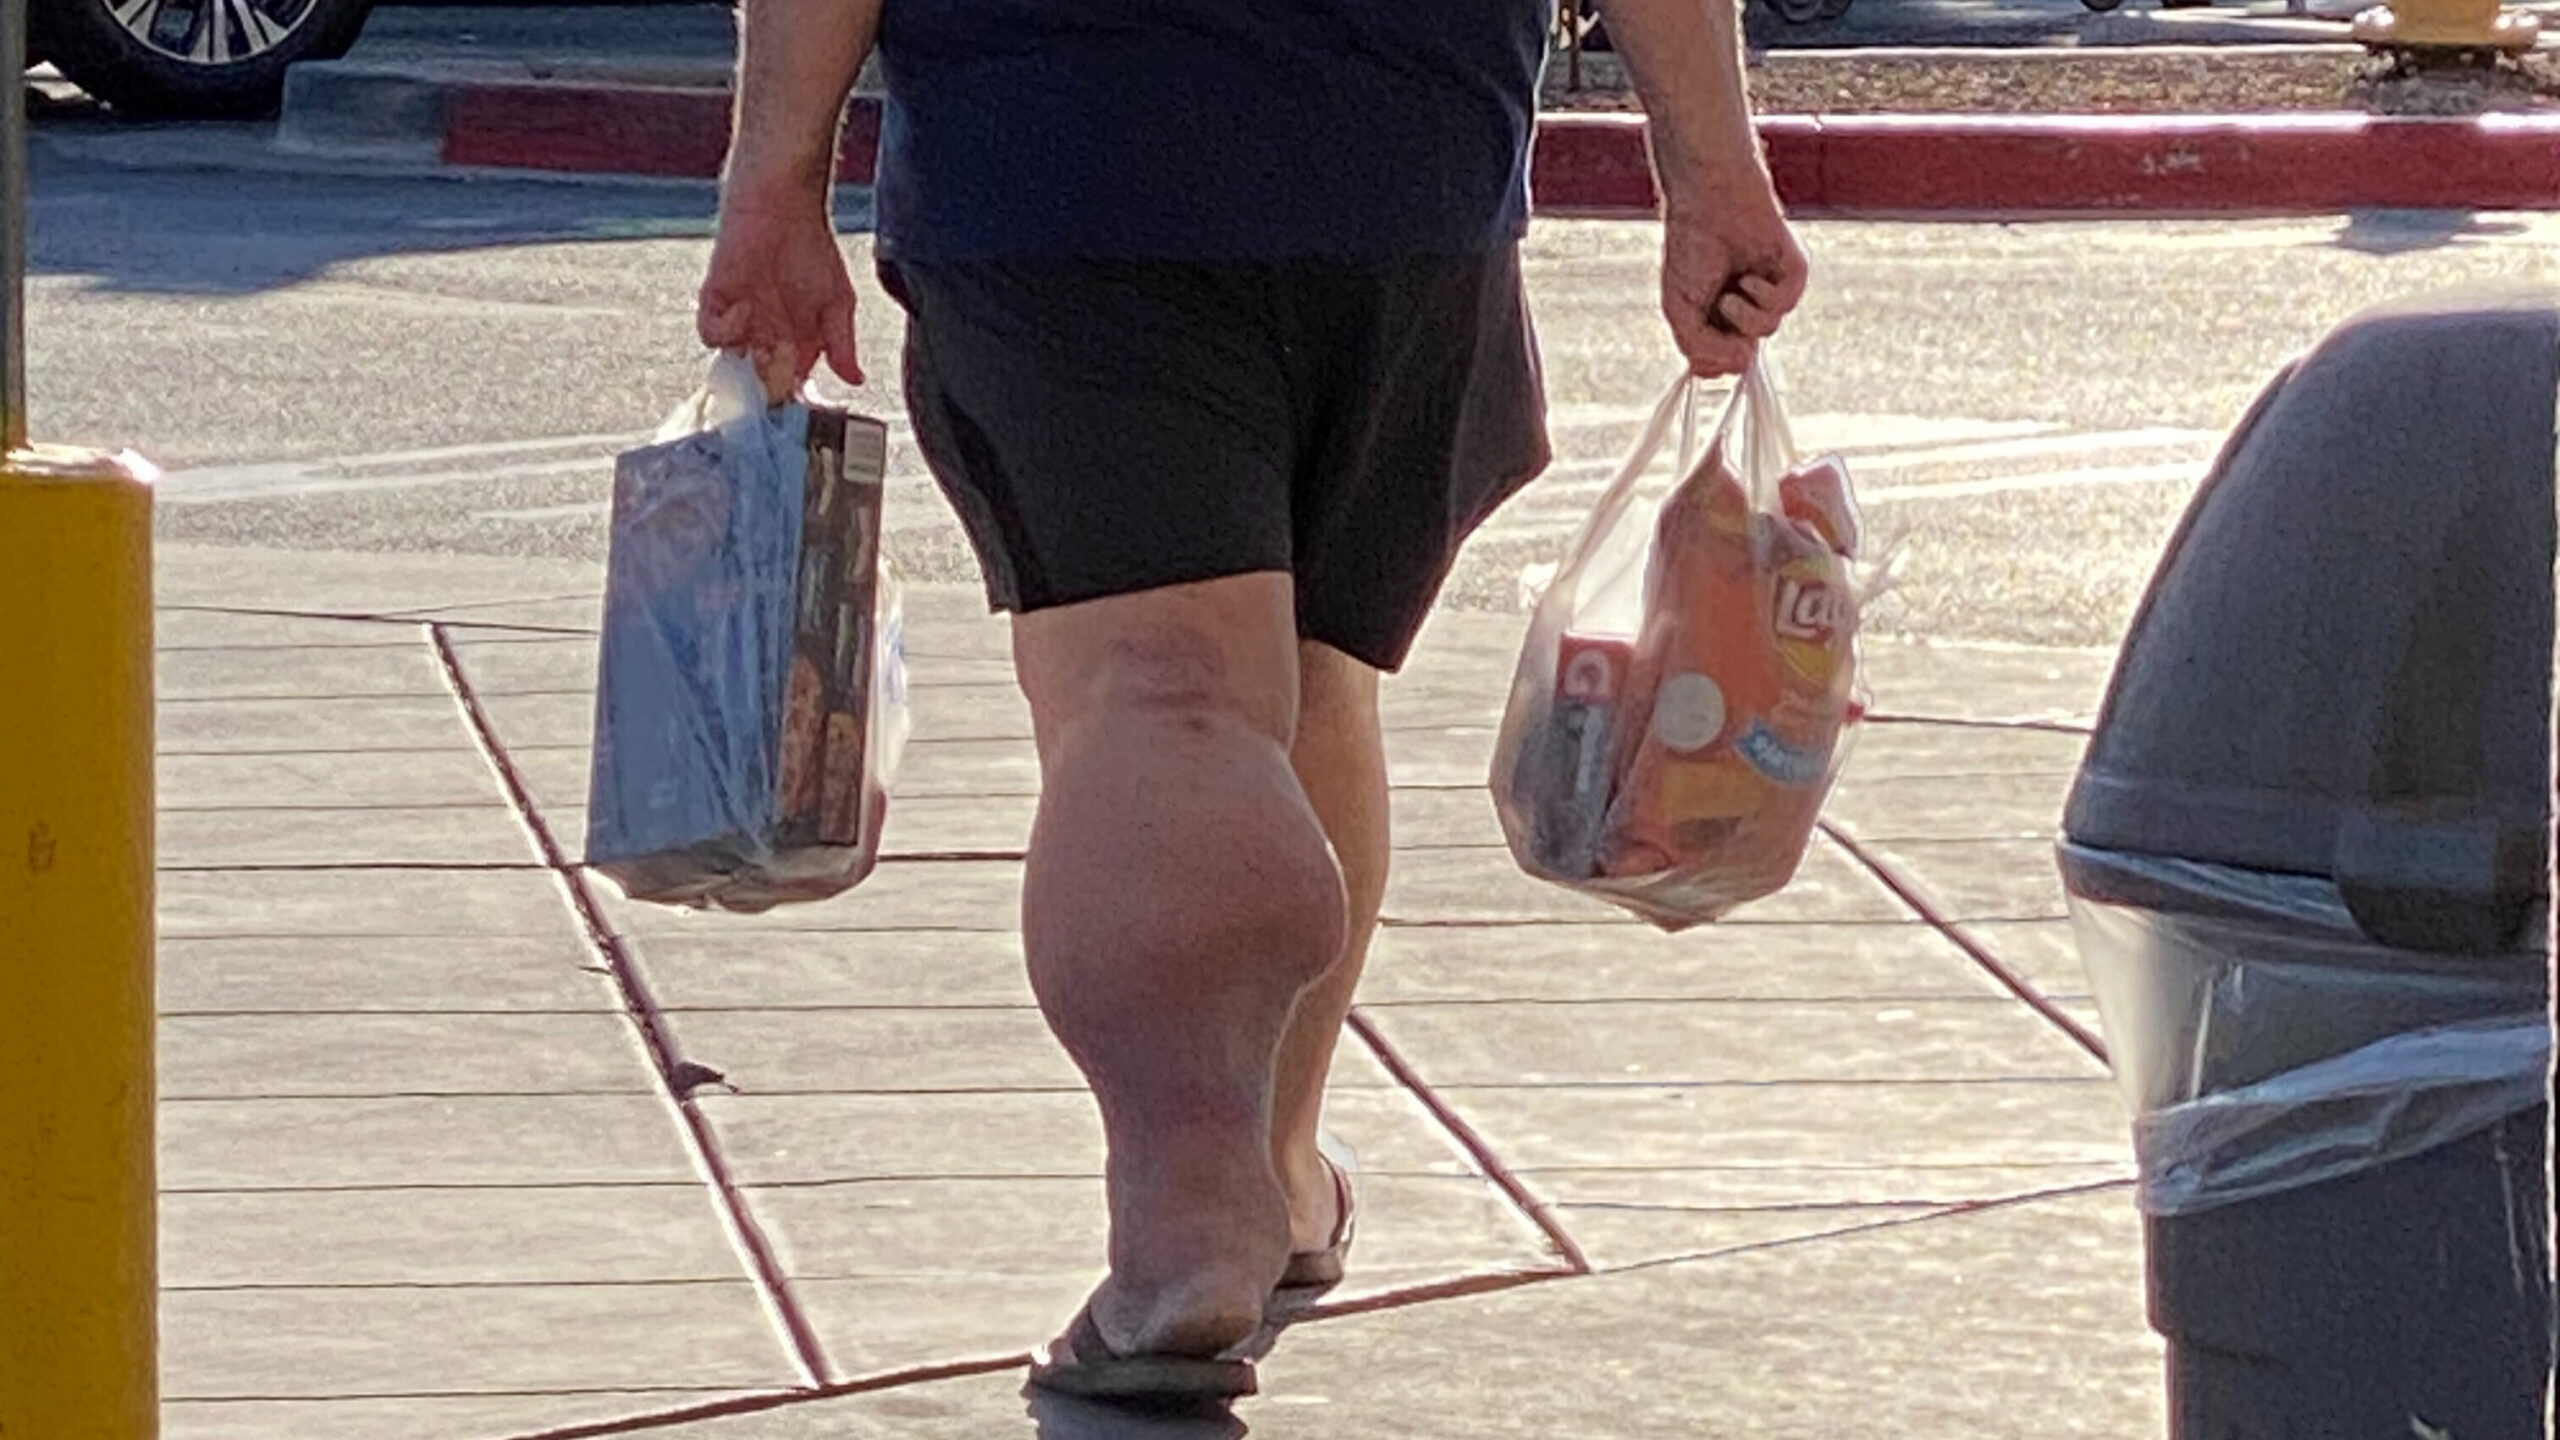 Obese Man Walking With Groceries